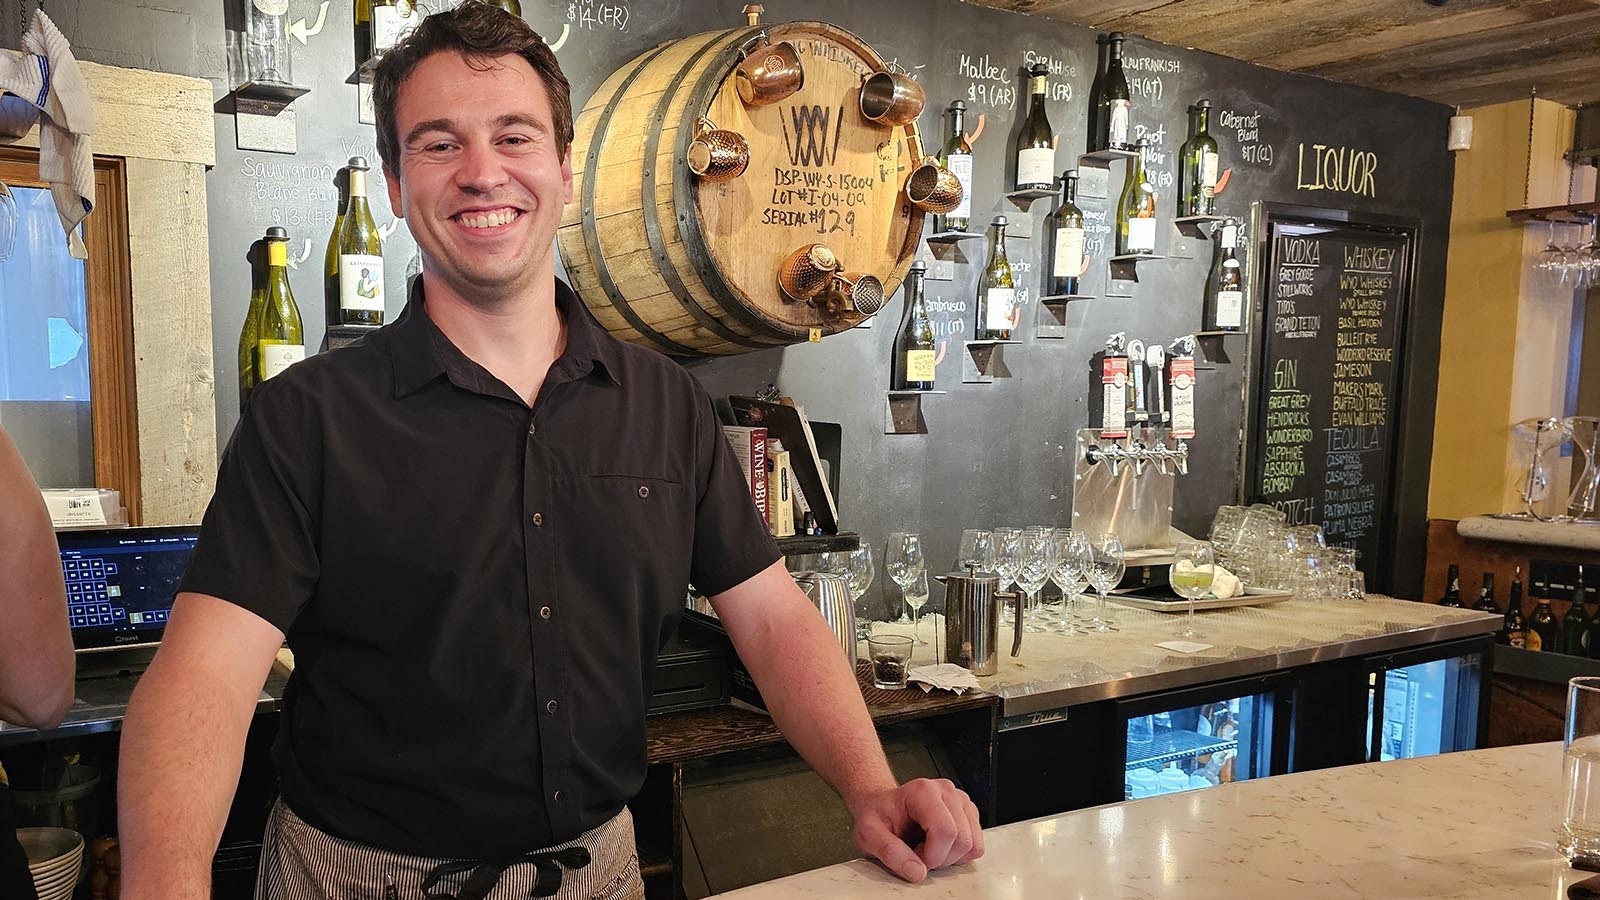 Cooper Tremblay is one of the servers at Bin22 in Jackson.